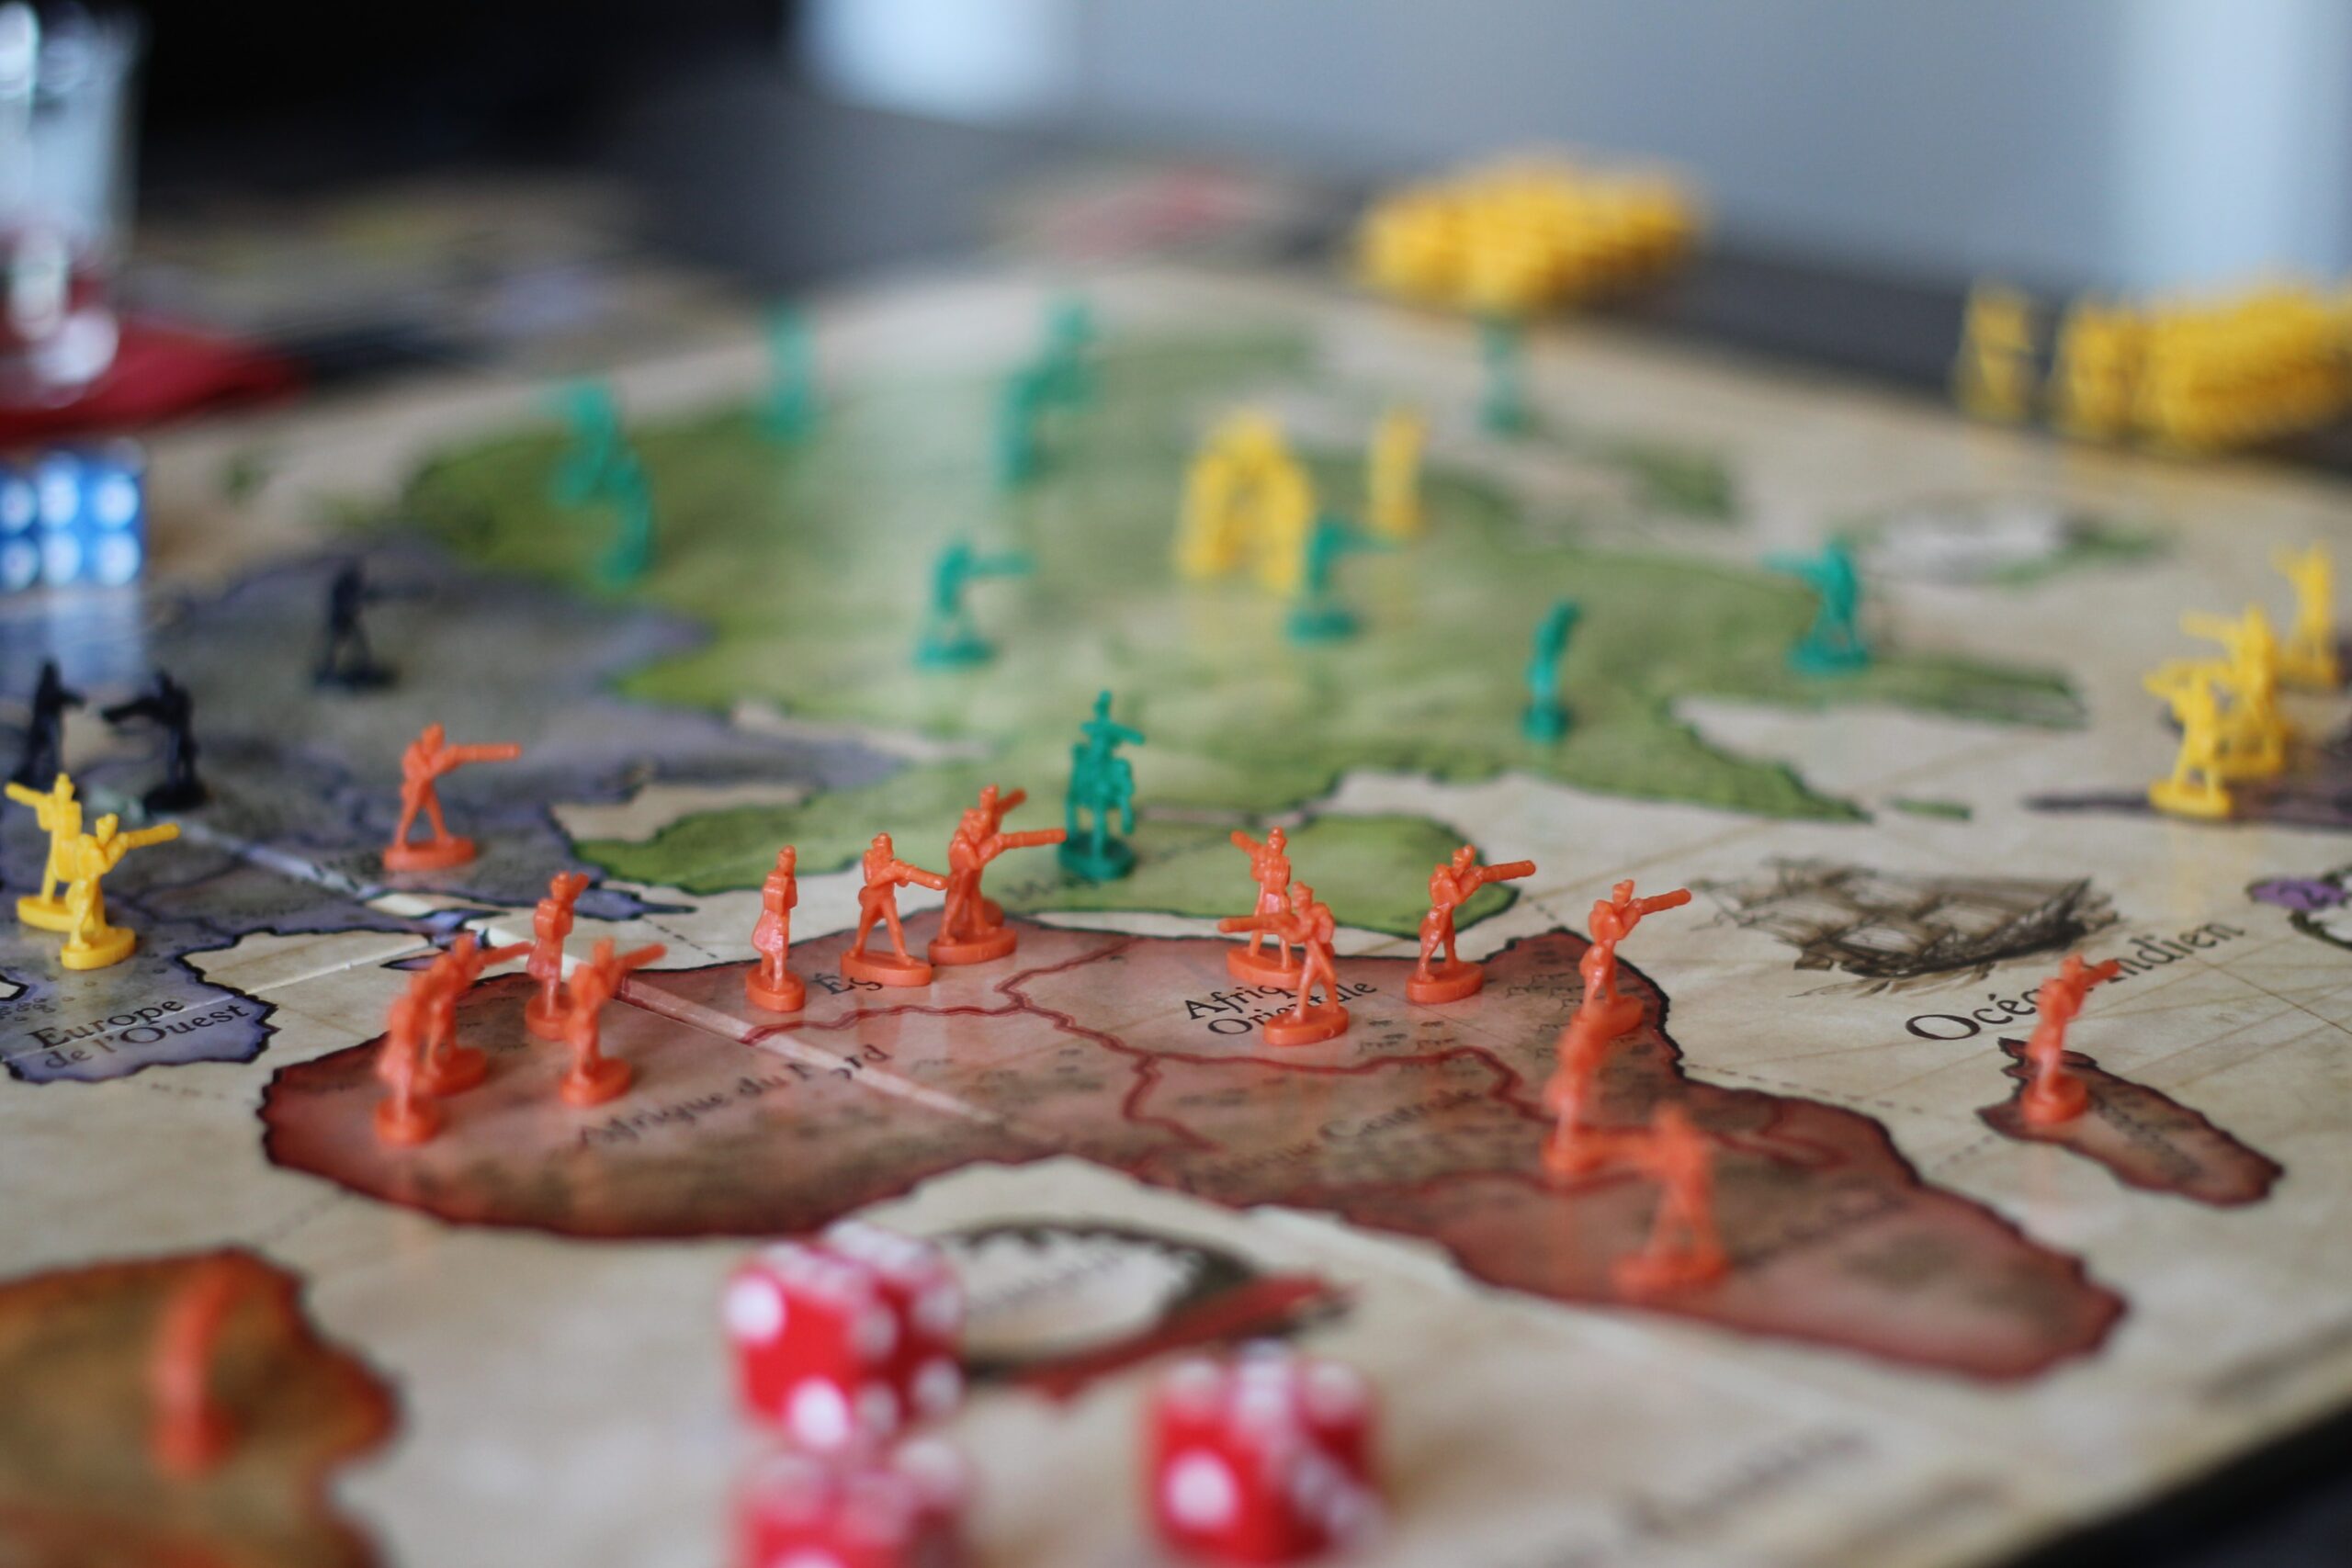  Role-Playing Board Games is Engaging for Players